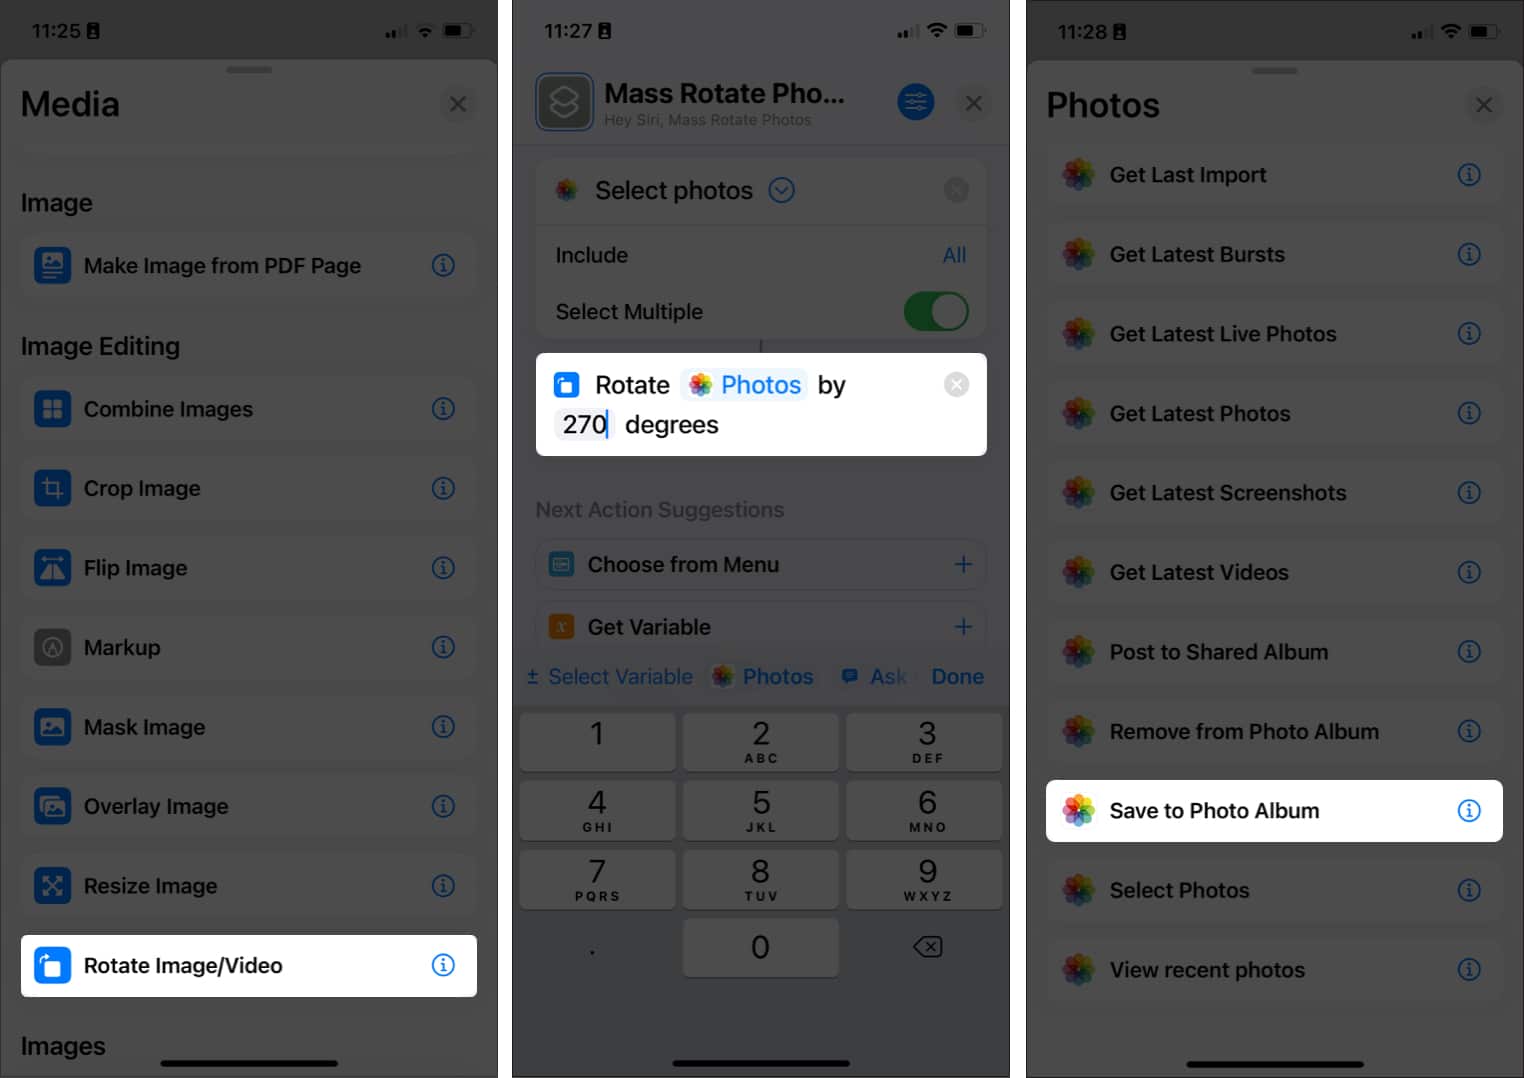 Choose Save to Photo Album from Shortcuts app on iPhone